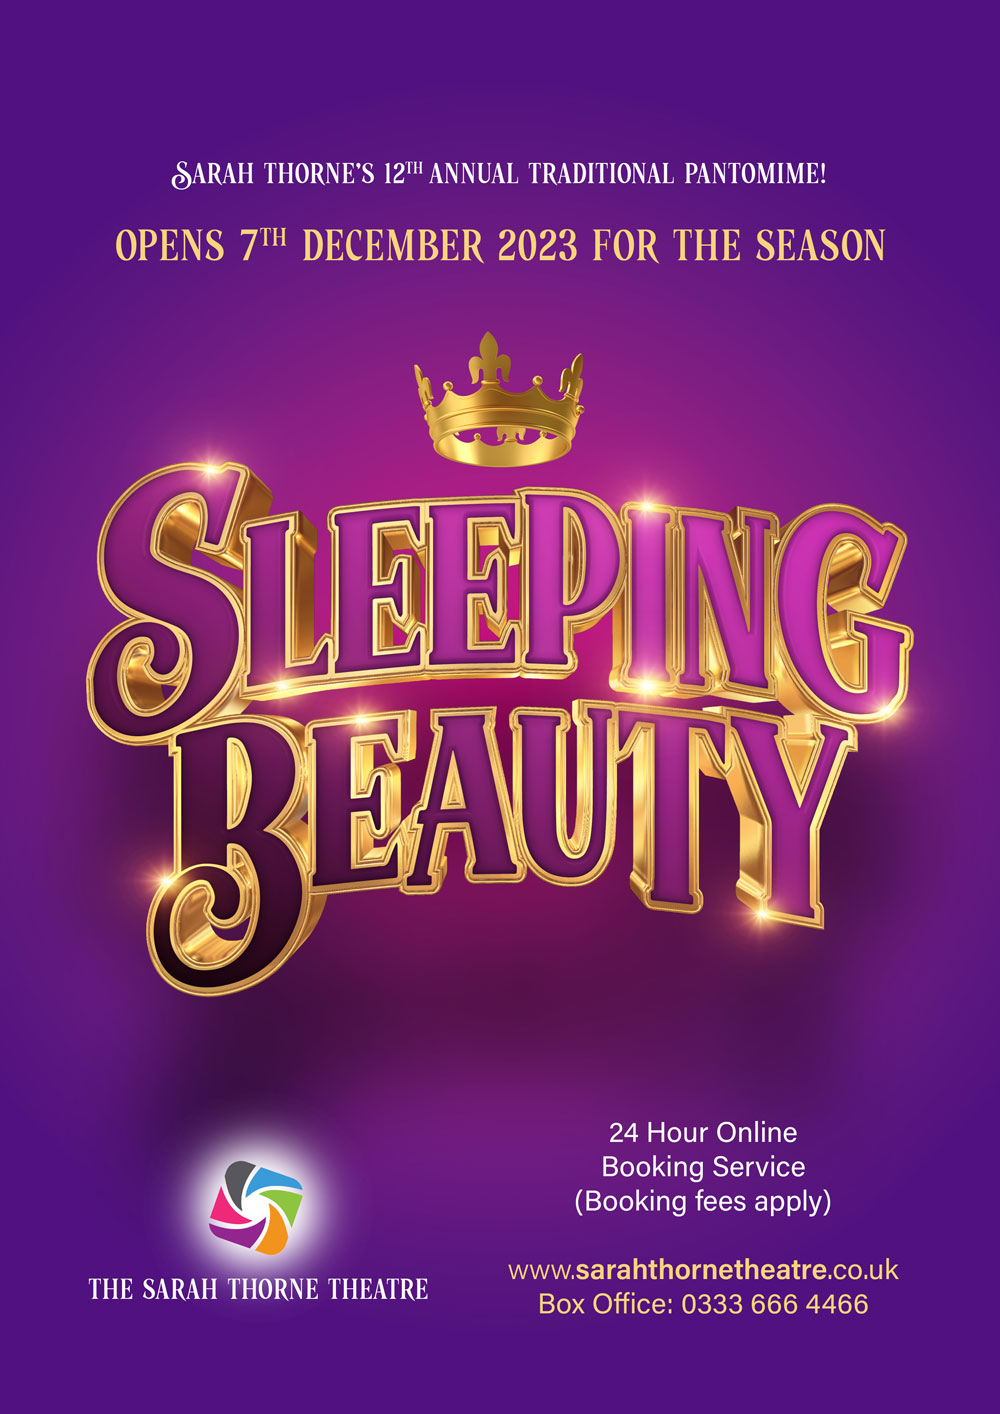 Image of Sarah Thorne Theatre event - Sleeping Beauty